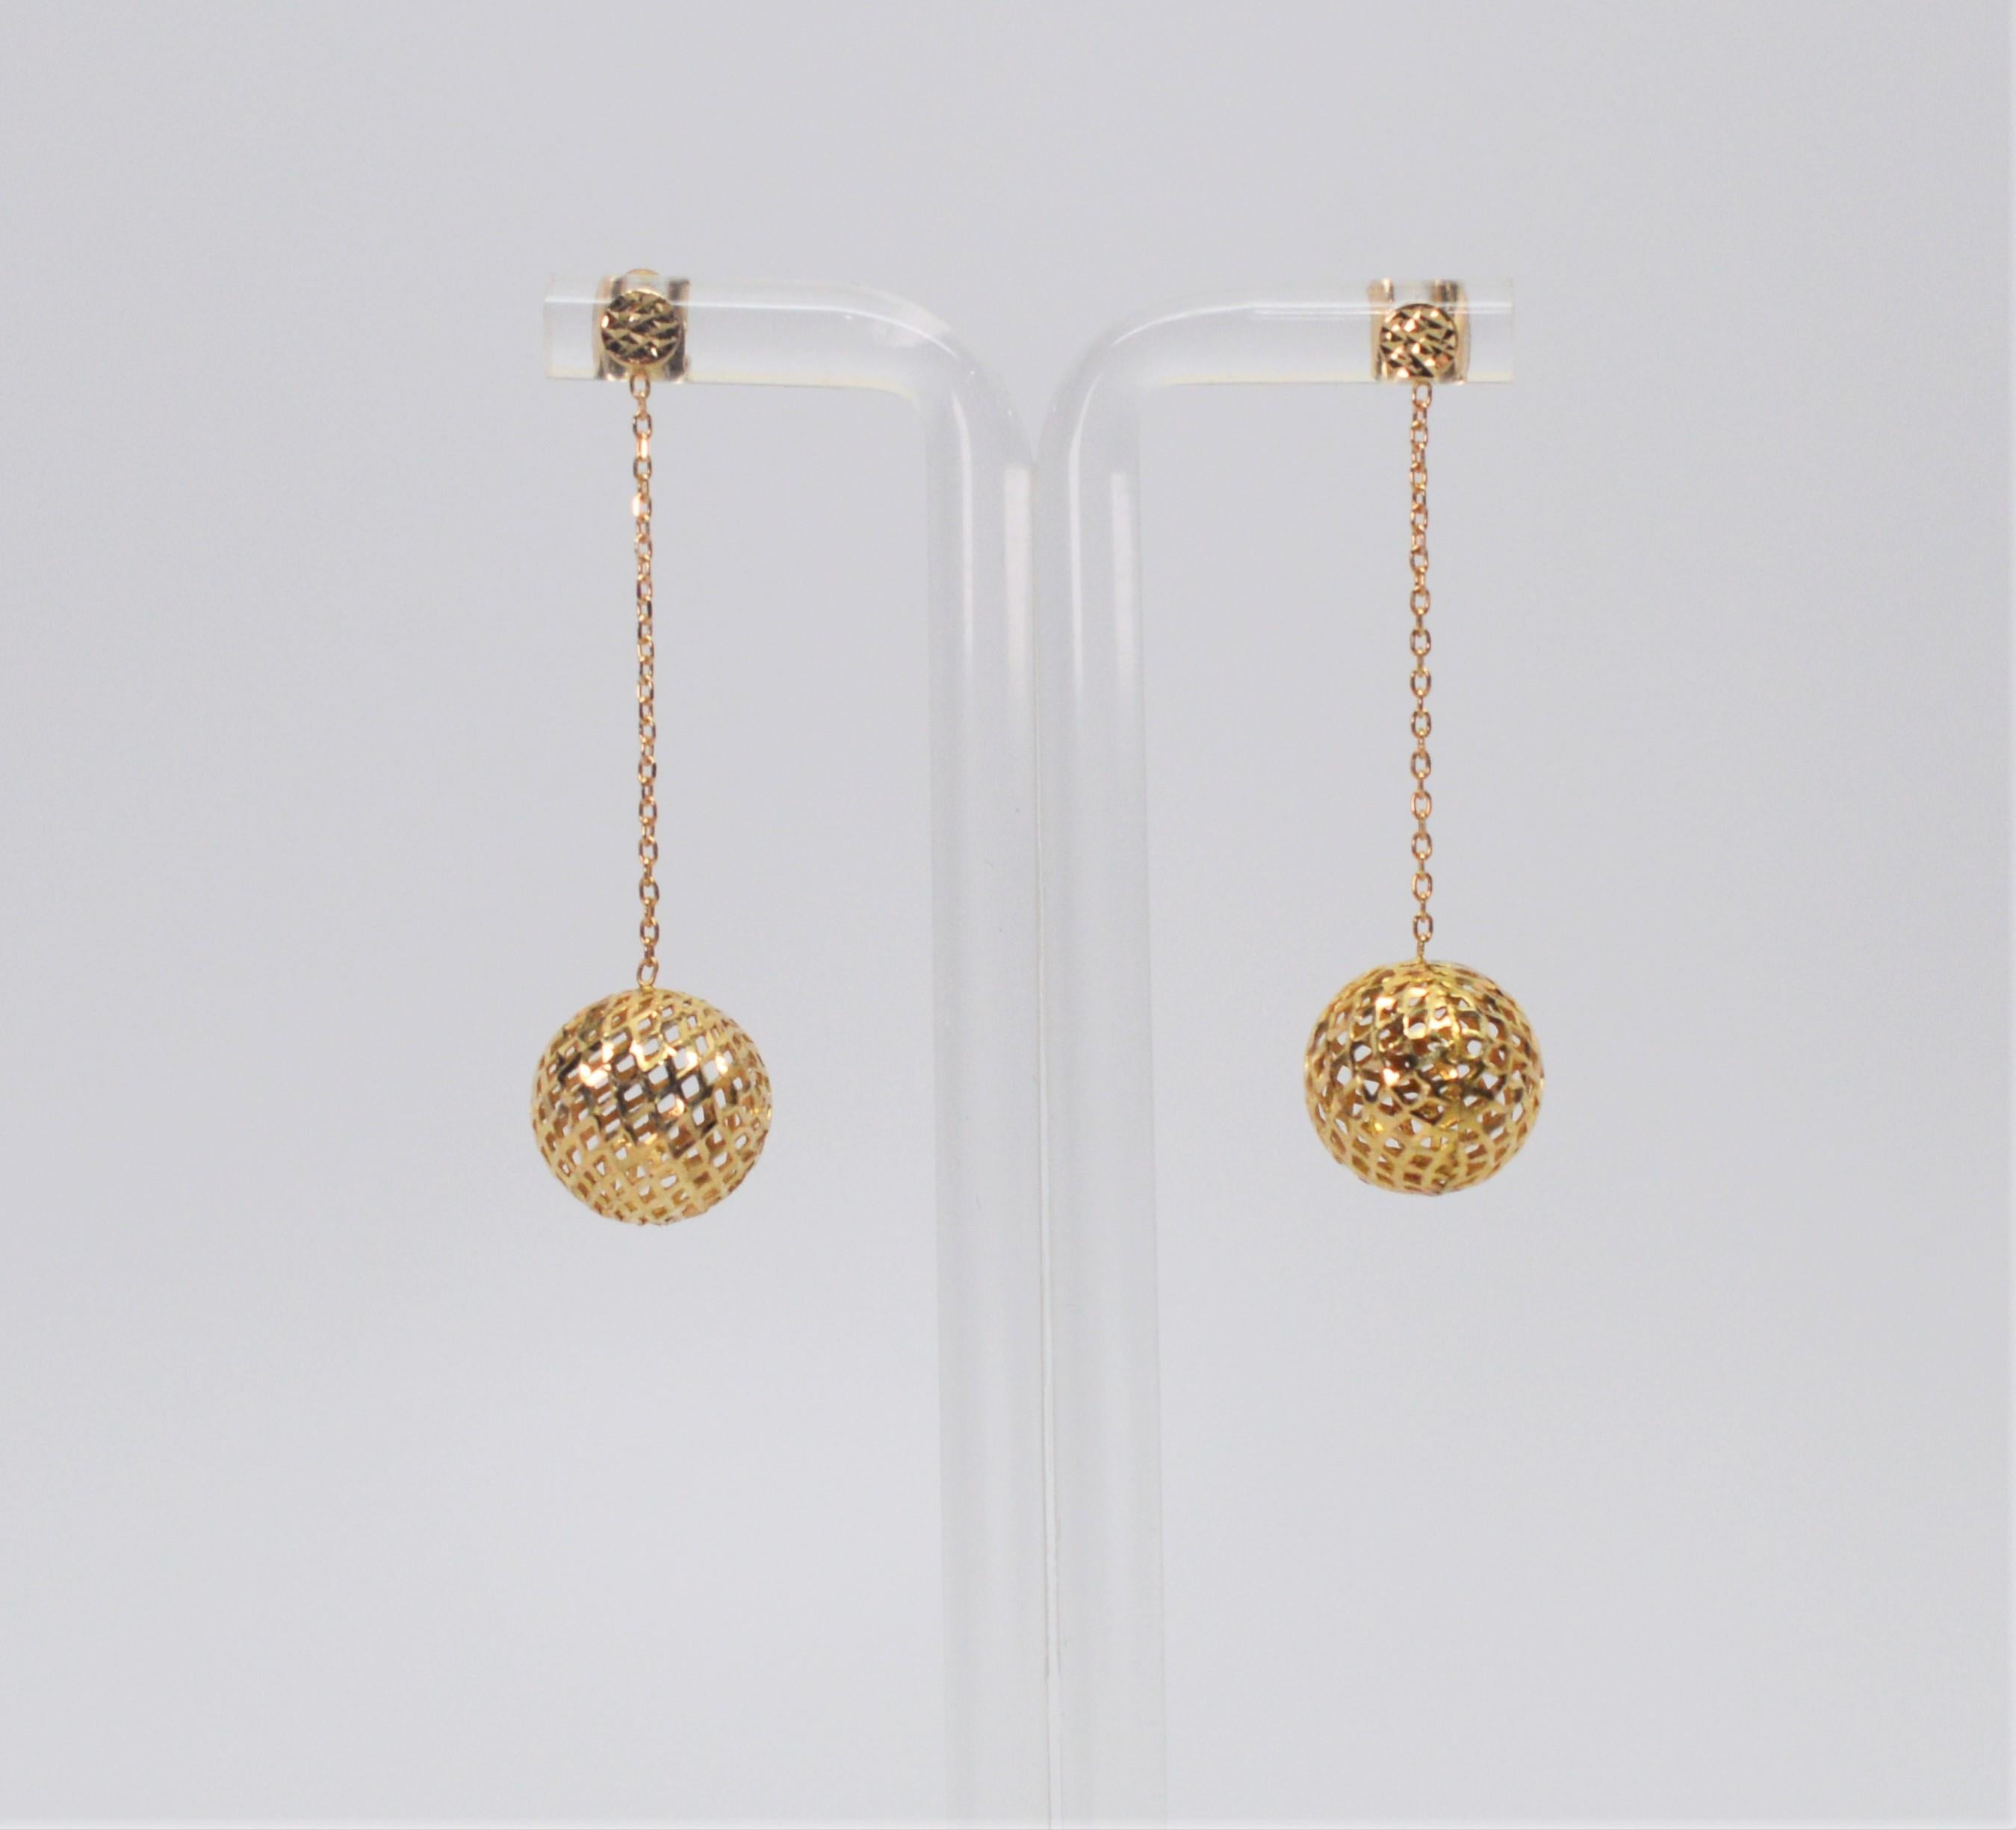 Flirty and fresh, bright fourteen carat yellow gold open weave balls catch the light and glisten while being suspended from 1-1/4 inch fine gold chain secured by post earring closures with hammered metal details.